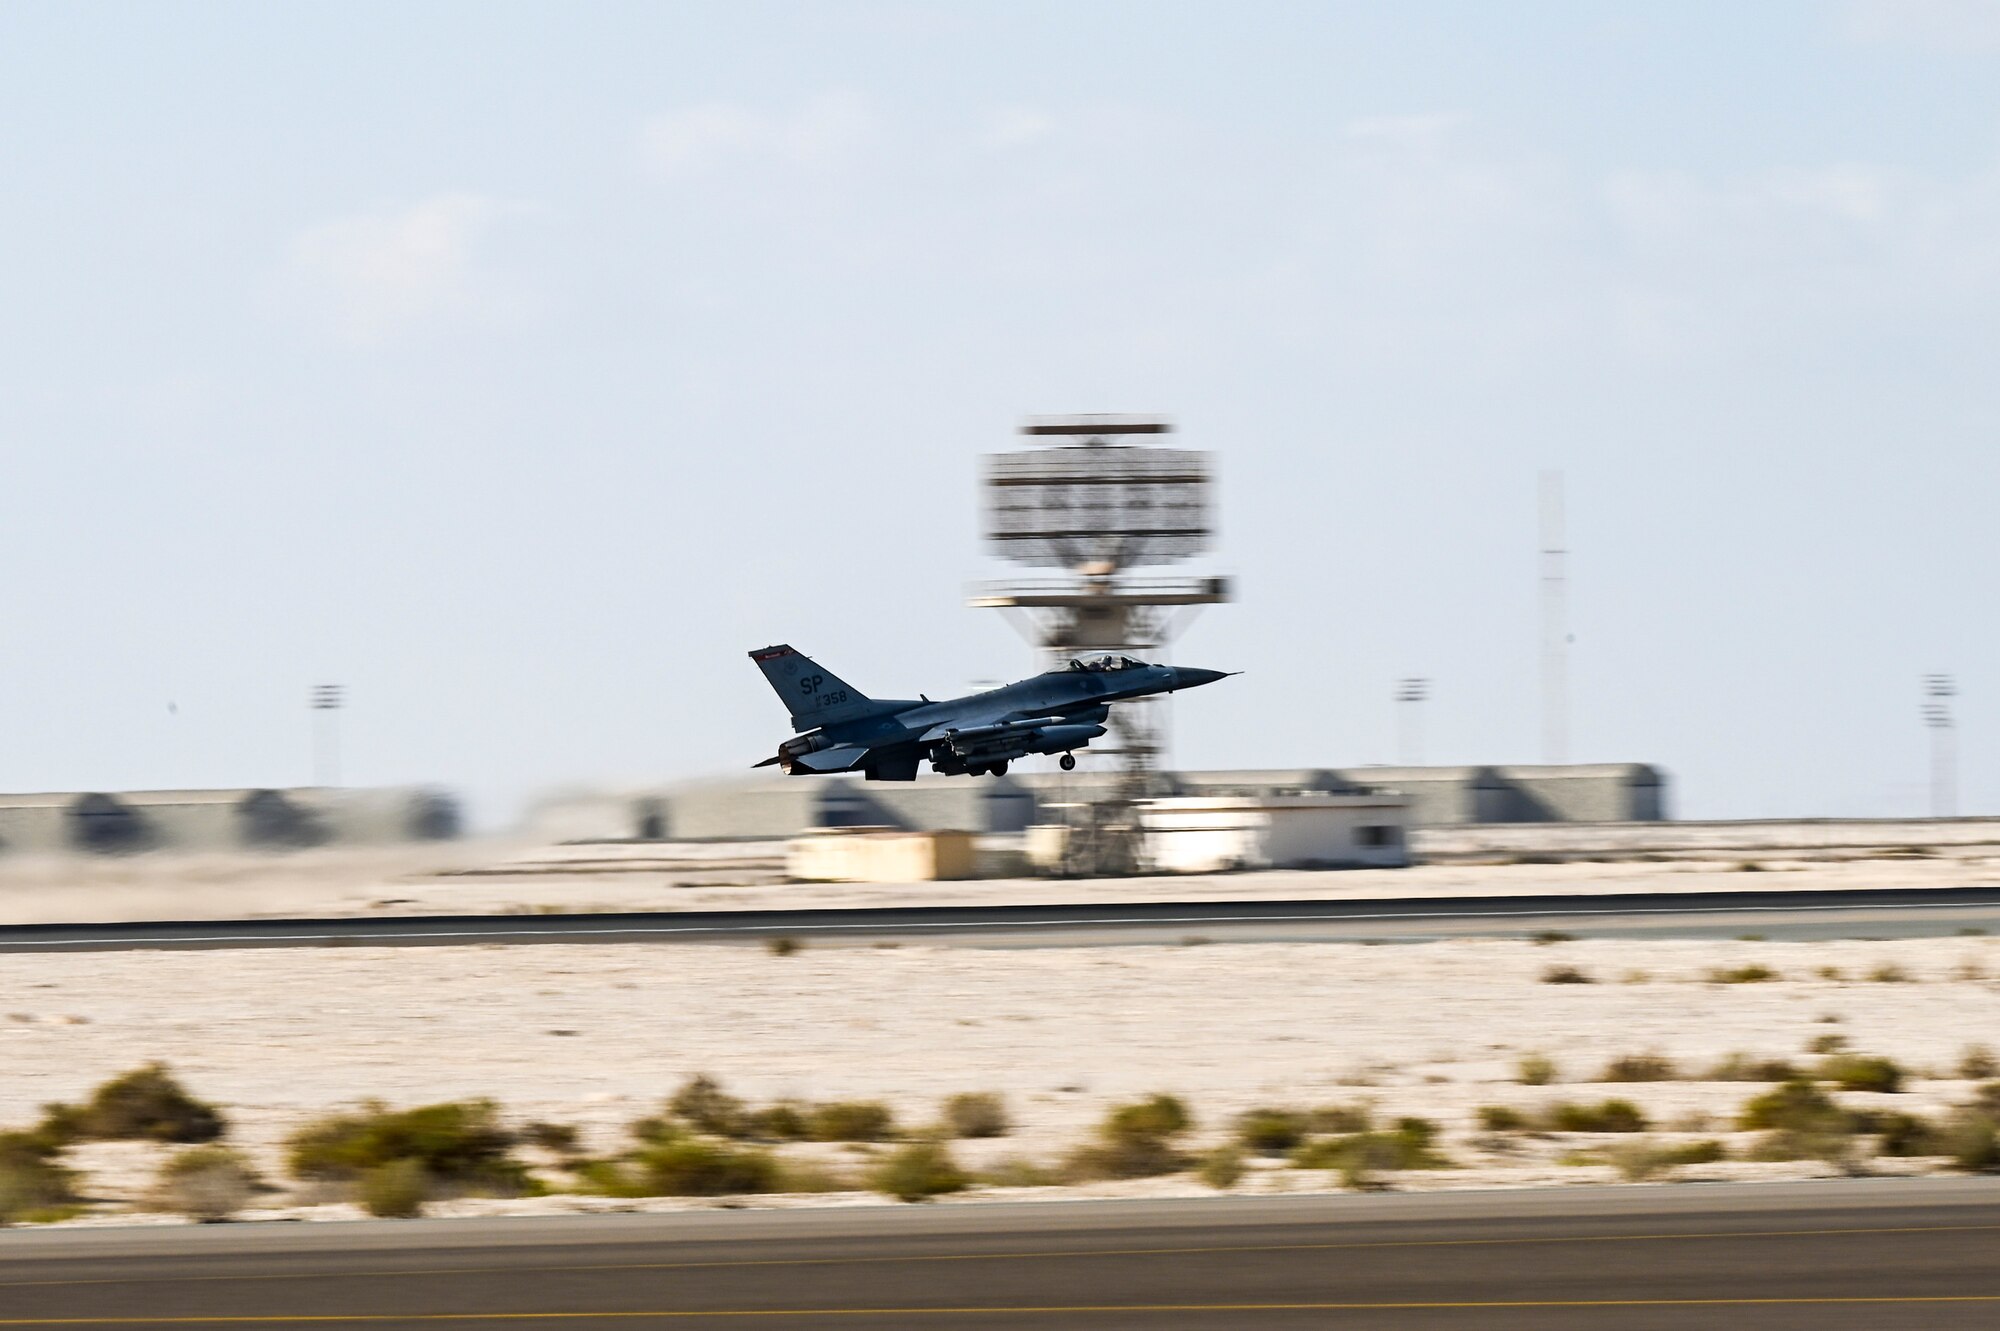 A U.S Air Force F-16 Fighting Falcon assigned to the 480th Expeditionary Fighter Squadron launches in support of a Bomber Task Force mission from Al Dhafra Air Base, United Arab Emirates, Dec. 10, 2020. The Bomber Task Force consisted of two B-52 Stratofortress aircraft from Barksdale Air Force Base, Louisiana. (U.S. Air Force photo by Staff Sgt. Miranda A. Loera)